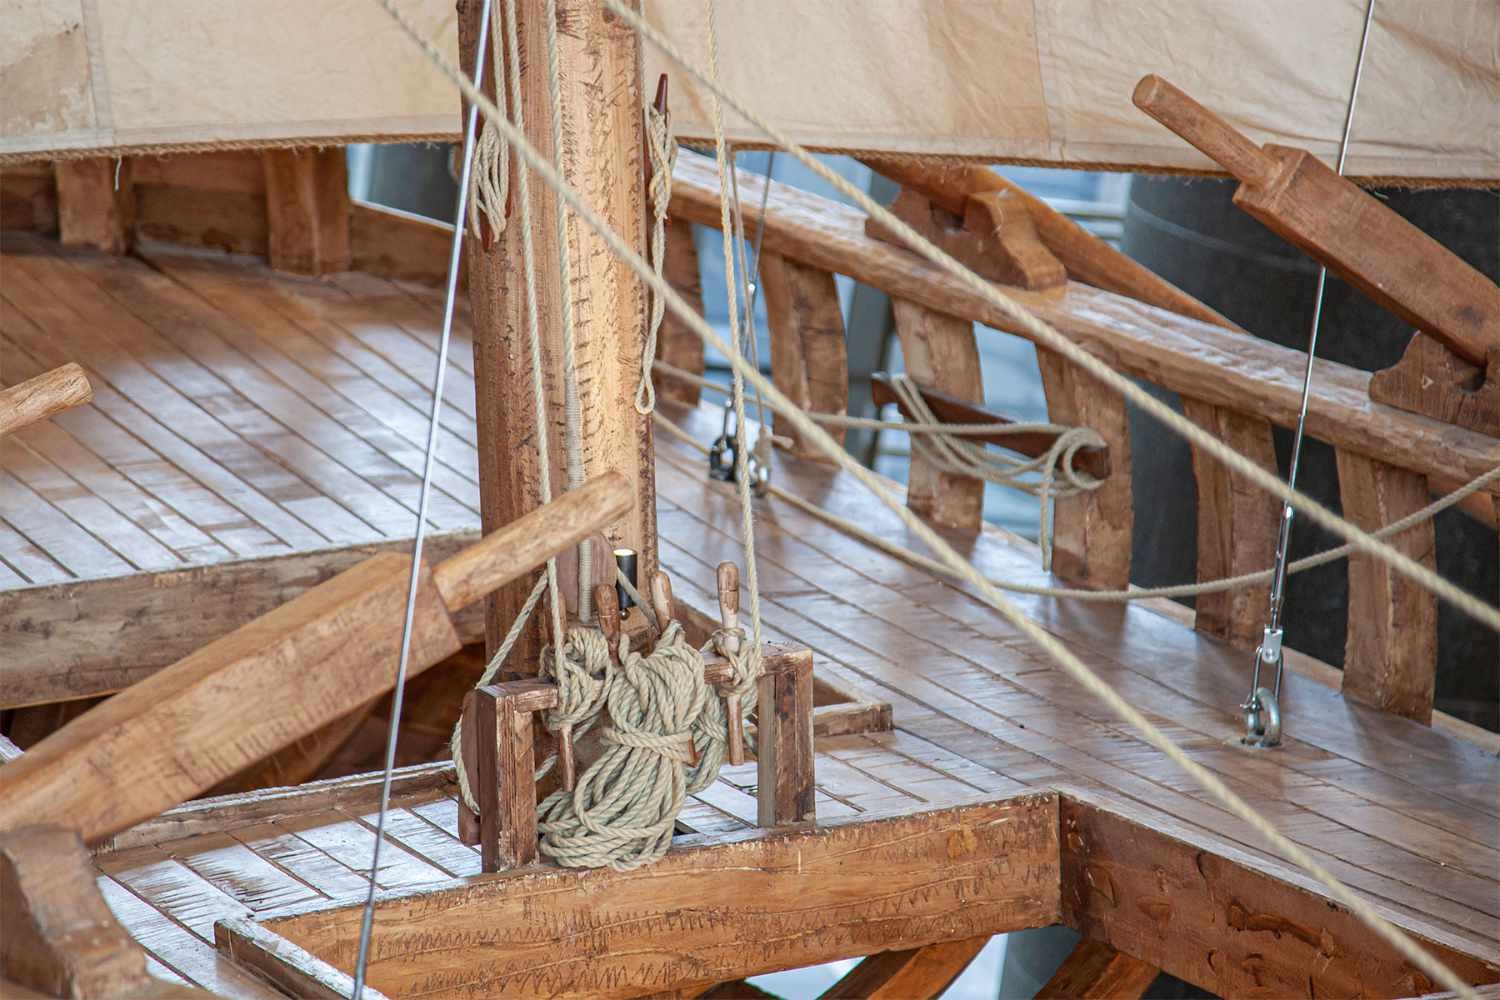 rose-hill-packet-deck-and-rigging-detail-lores.jpg